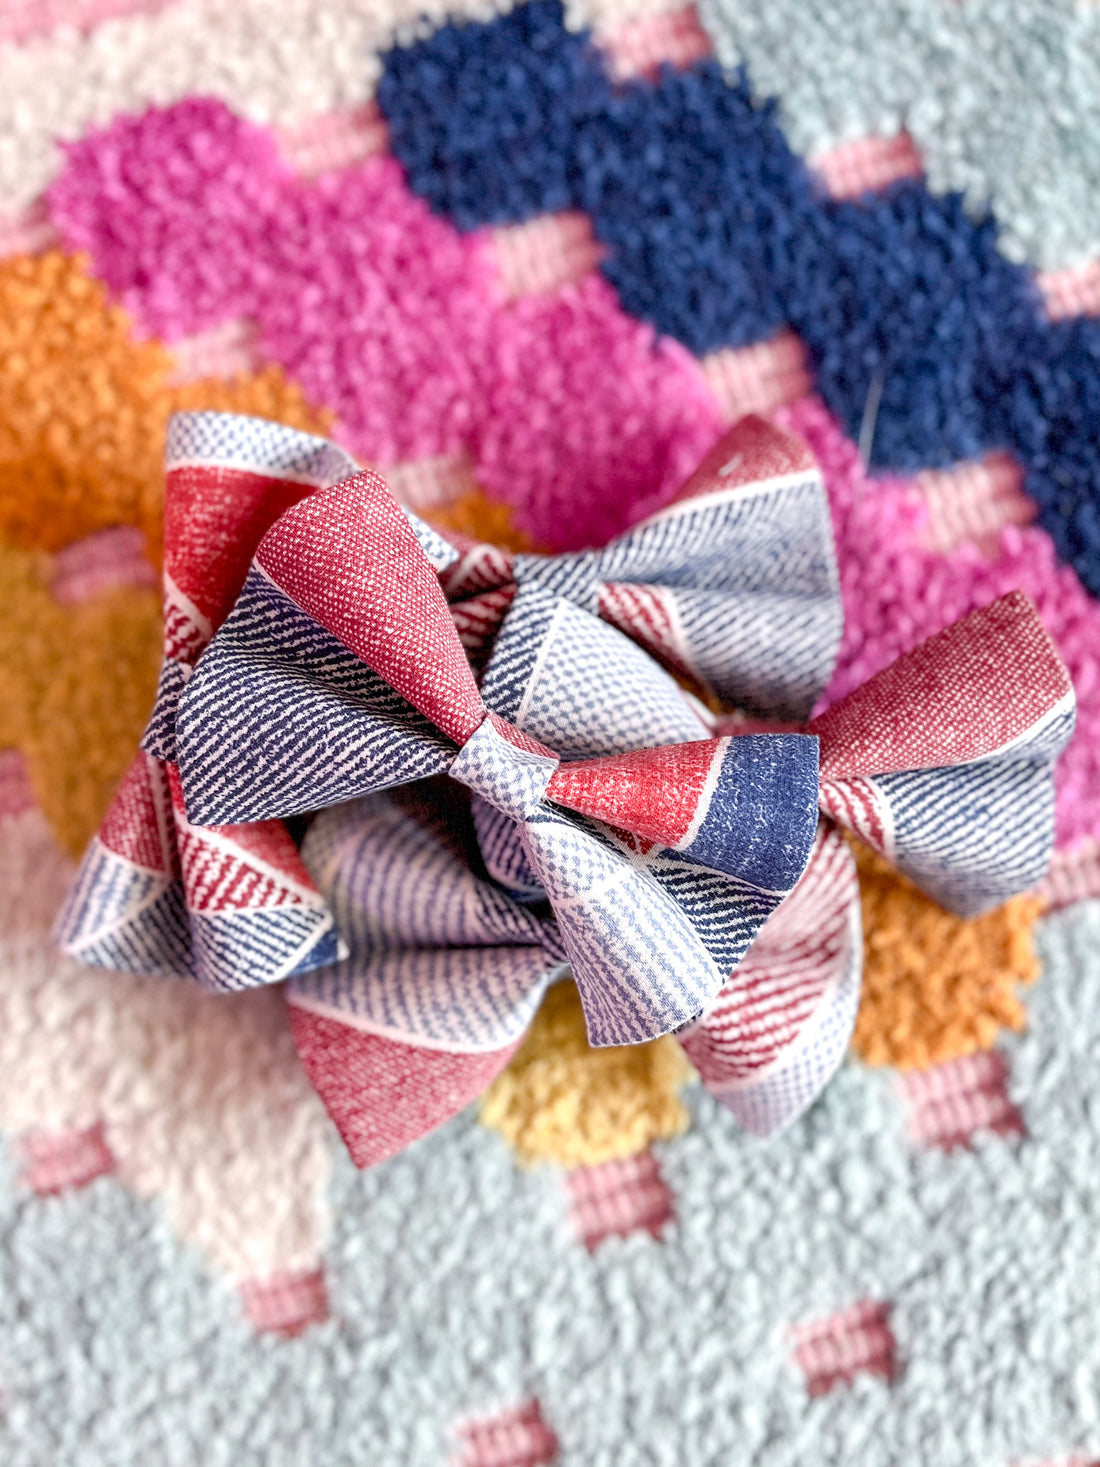 Red and Blue Pet Bow Tie